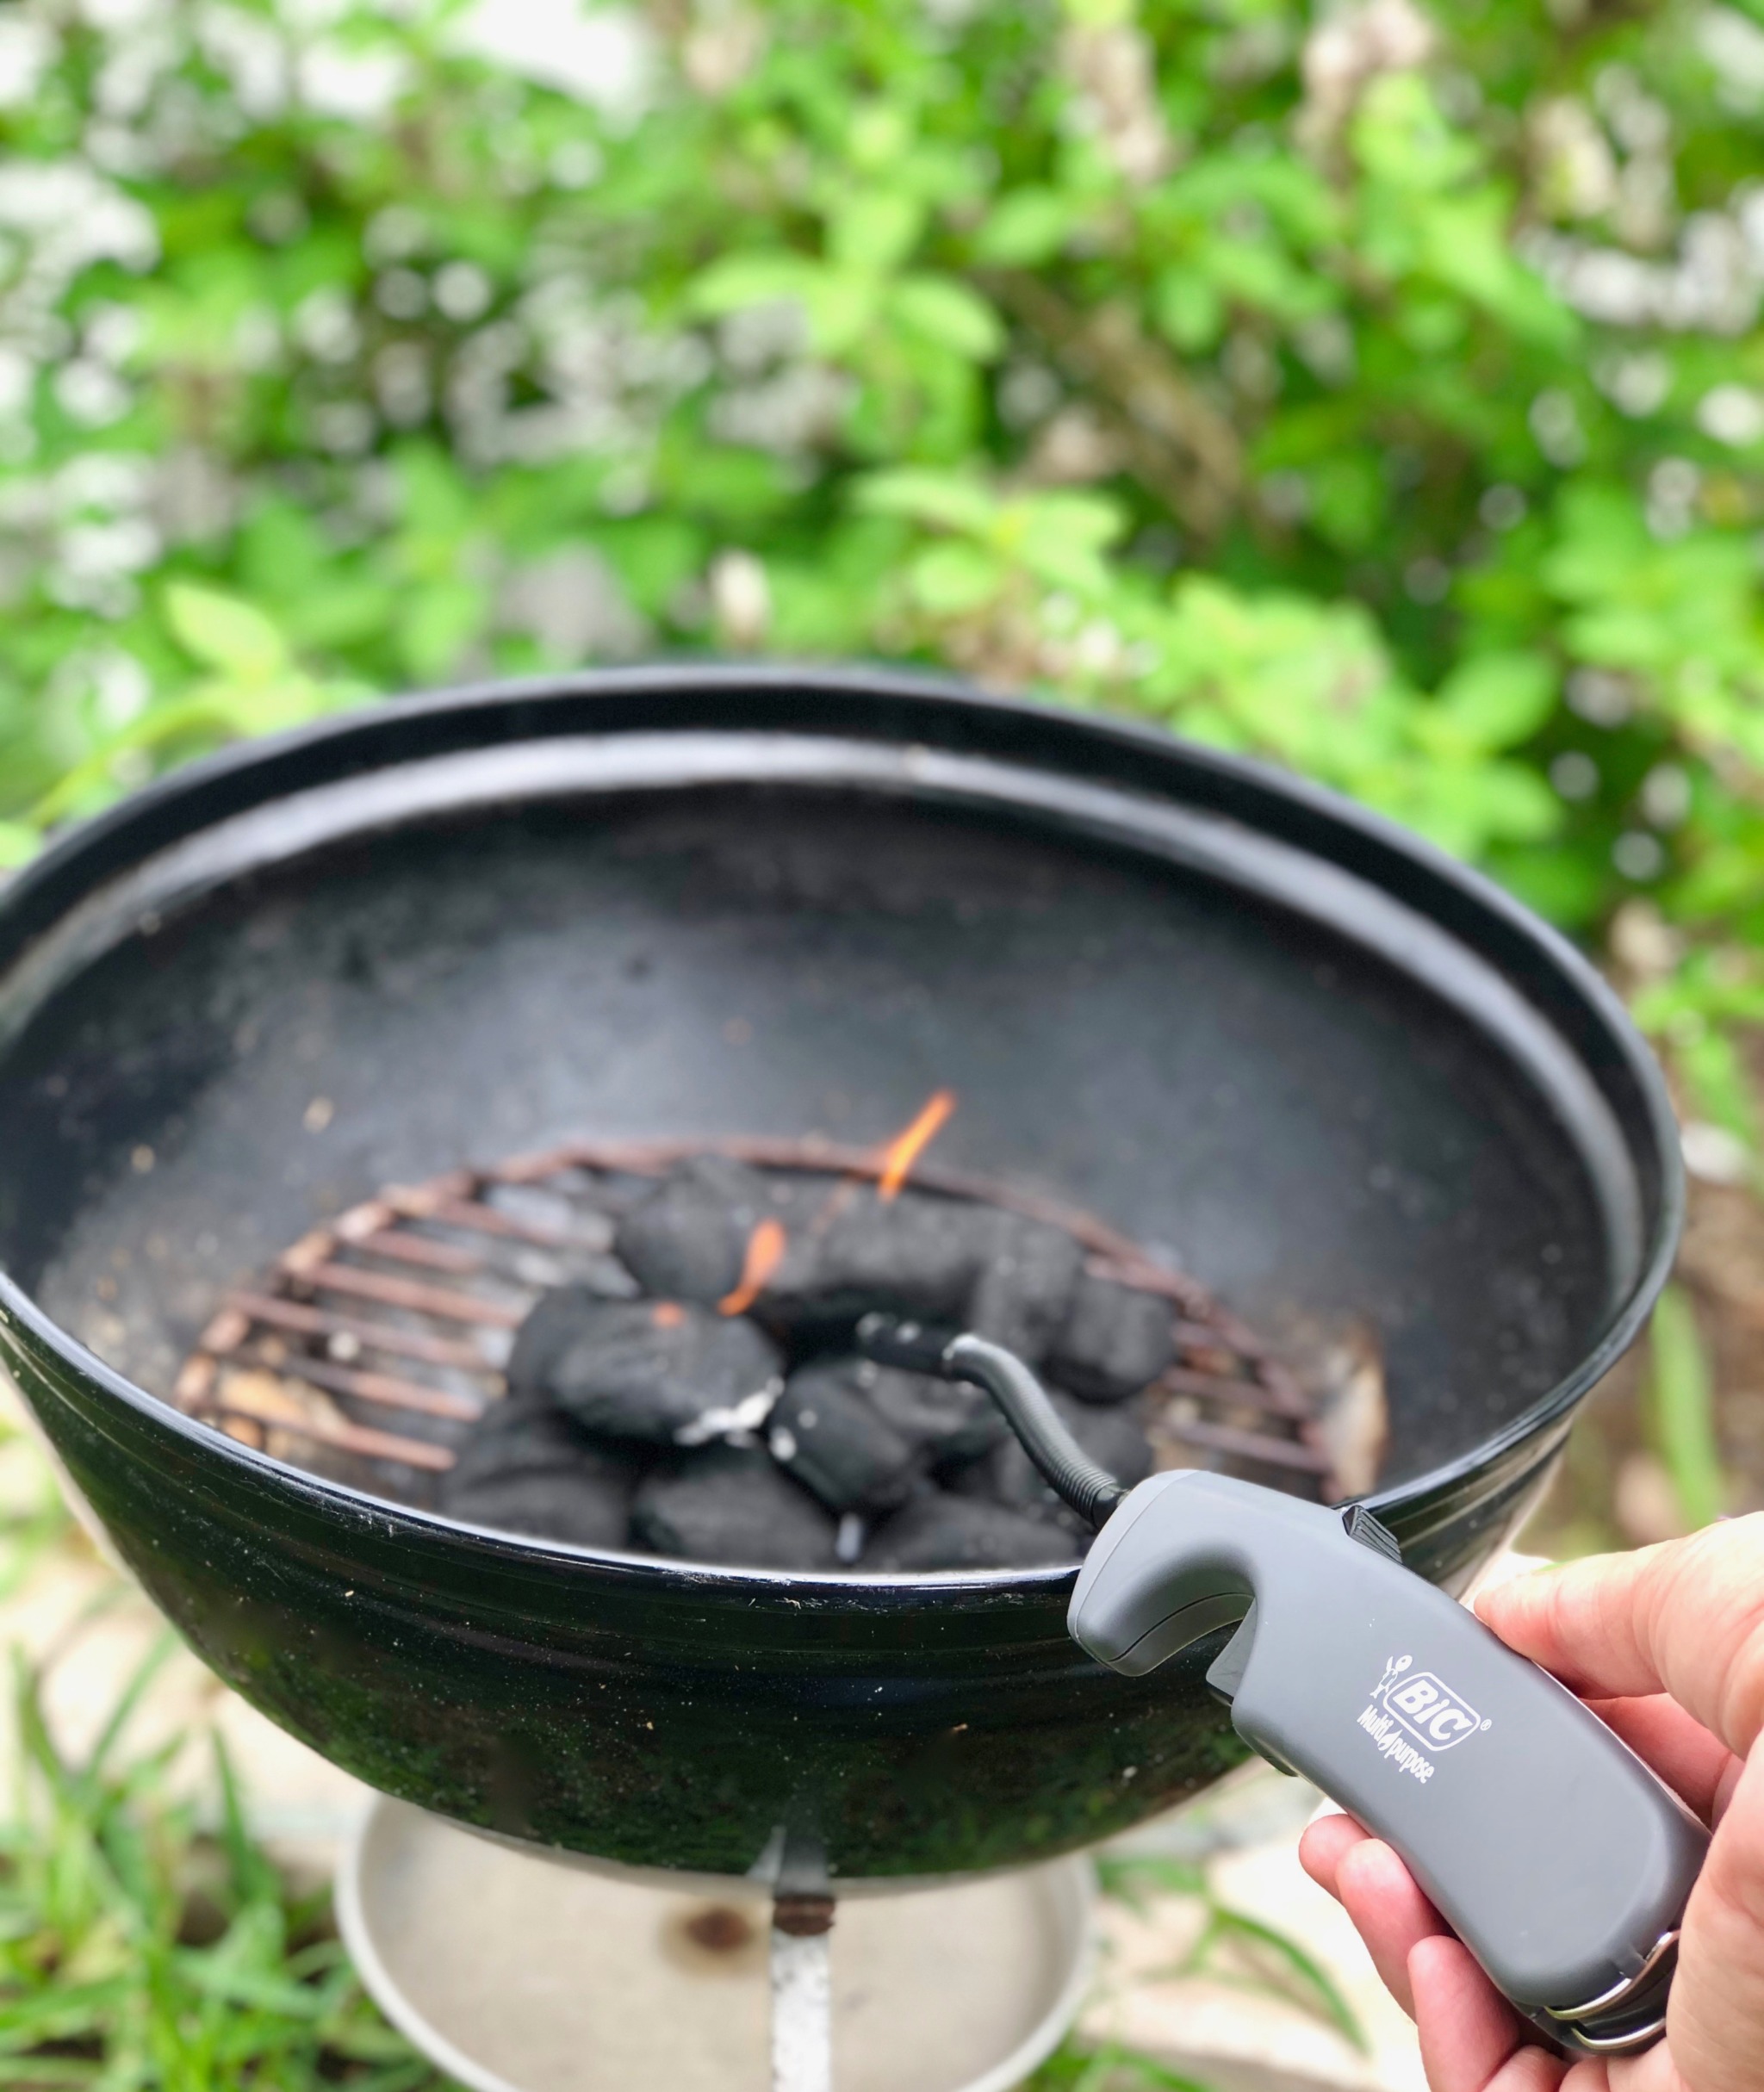 Best way to light up your charcoal grill